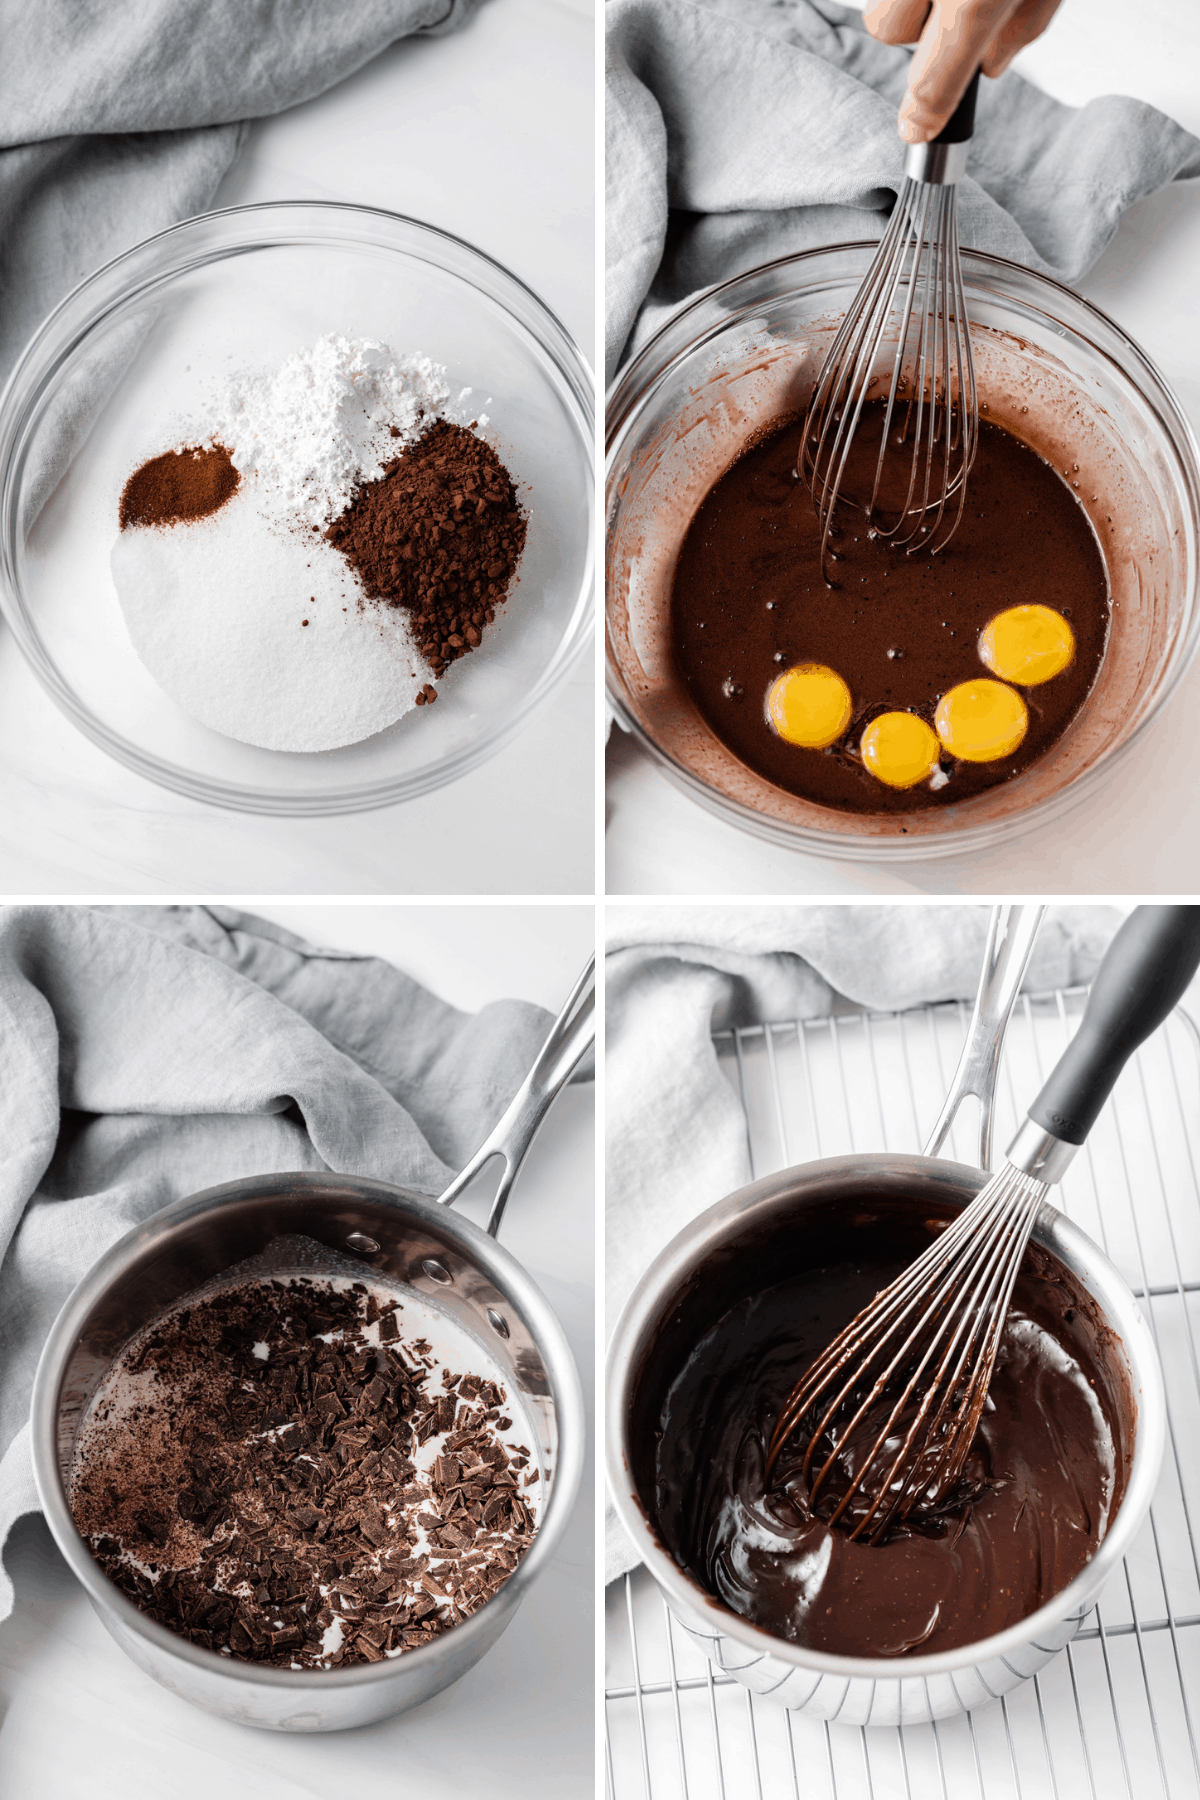 dry ingredients in glass bowl, chocolate with eggs in glass bowl, chopped chocolate in pot with milk, and chocolate pudding in pot with whisk